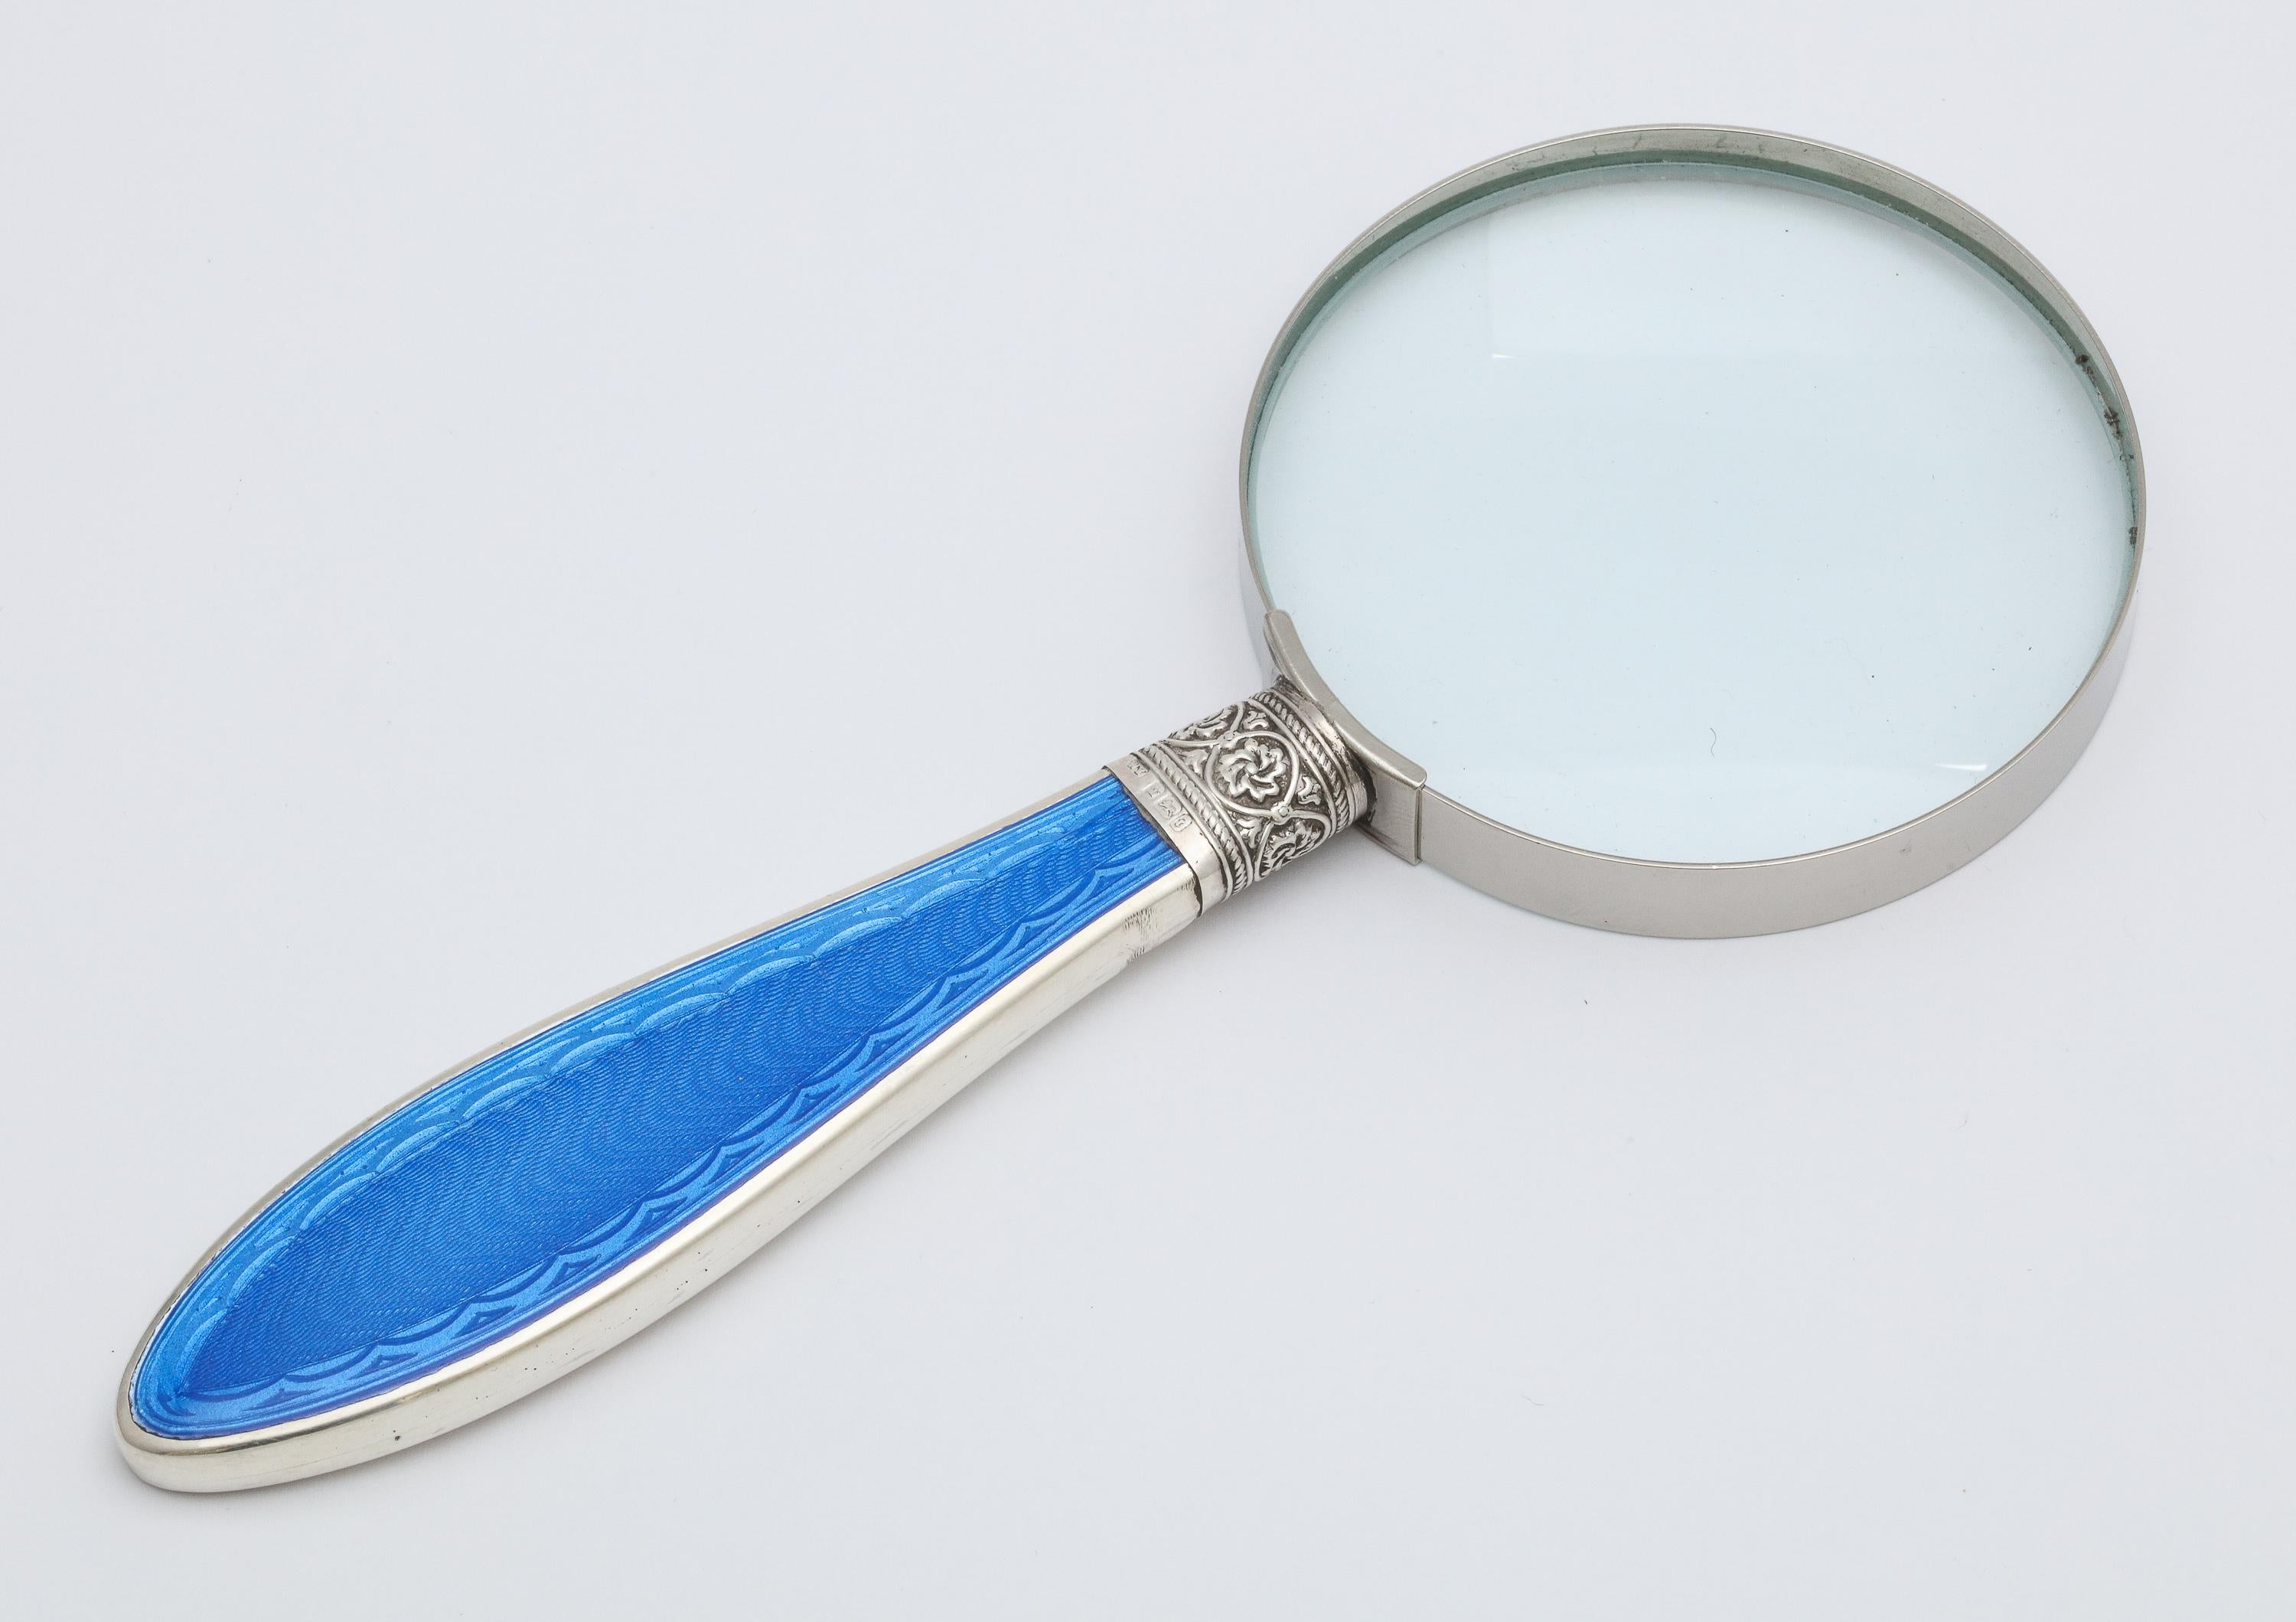 Edwardian, sterling silver and dark blue guilloche enamel, mounted magnifying glass, Sheffield, England, 1901- William Yates - maker. Dark blue guilloche enamel, which is on one side of the handle, has a beautiful border. The enamel seems to shimmer